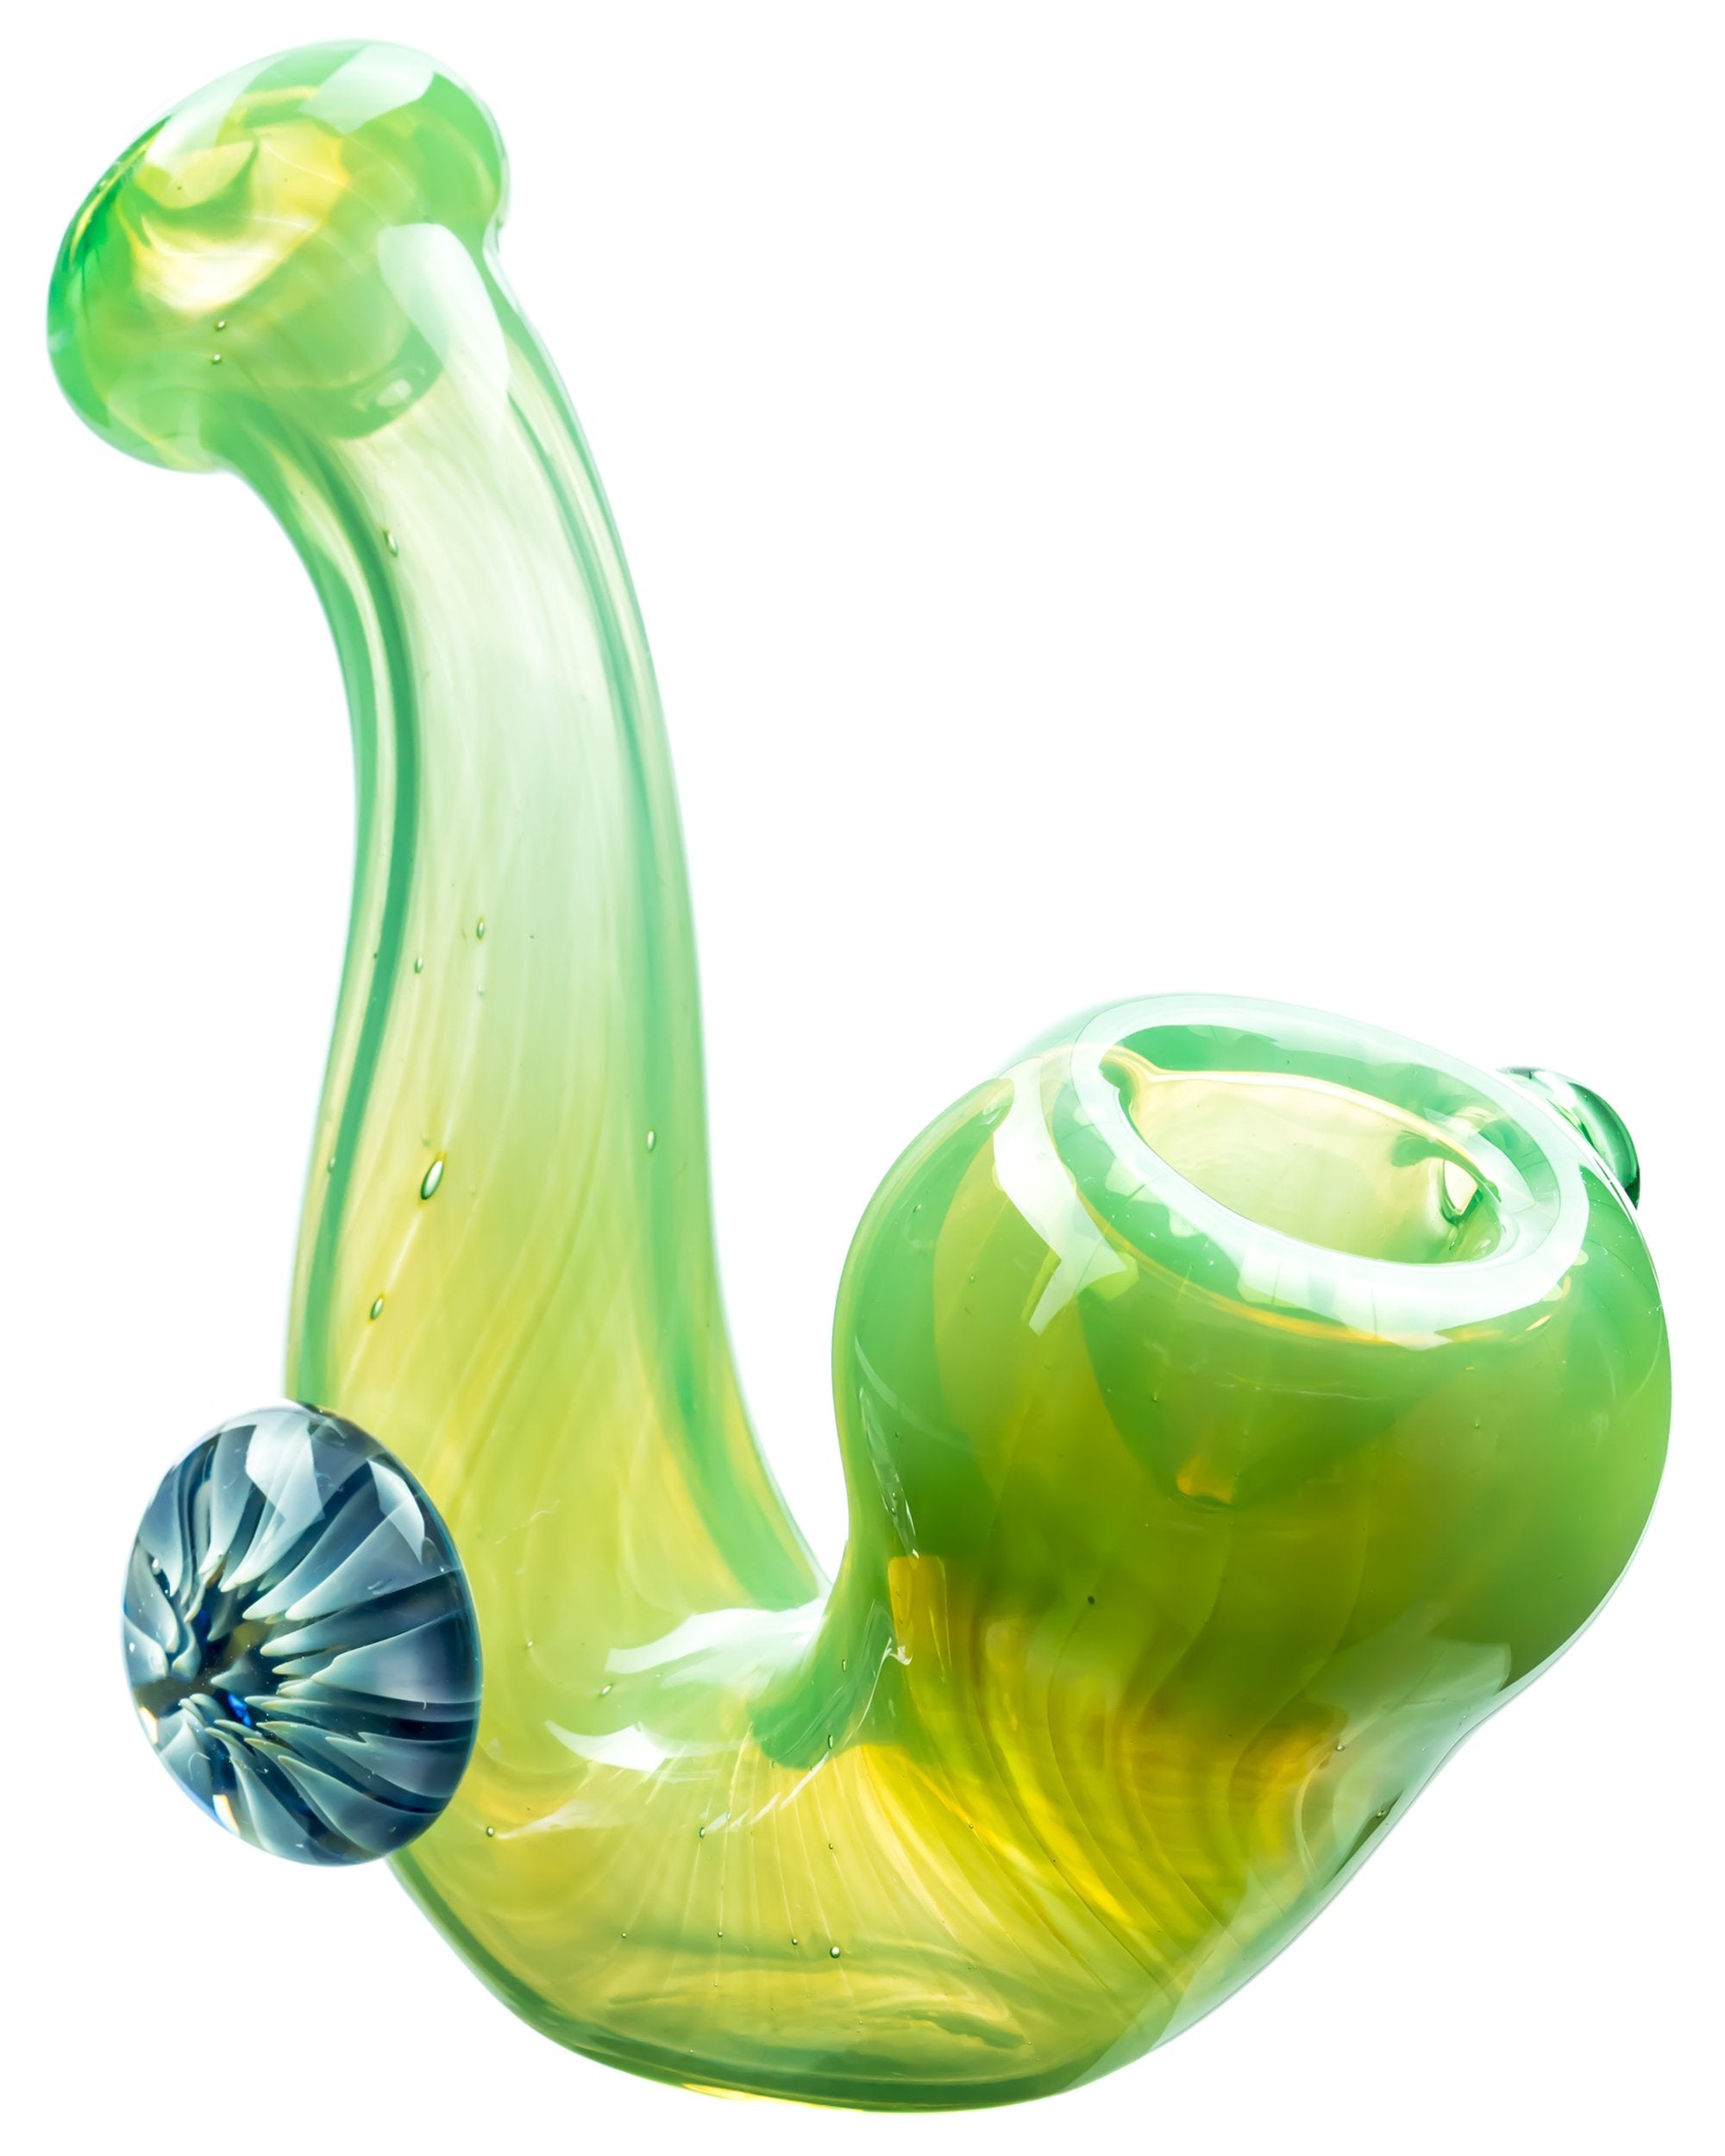 2020 Smoker Gift Guide Pt. 2: Bongs, Dab Rigs and More